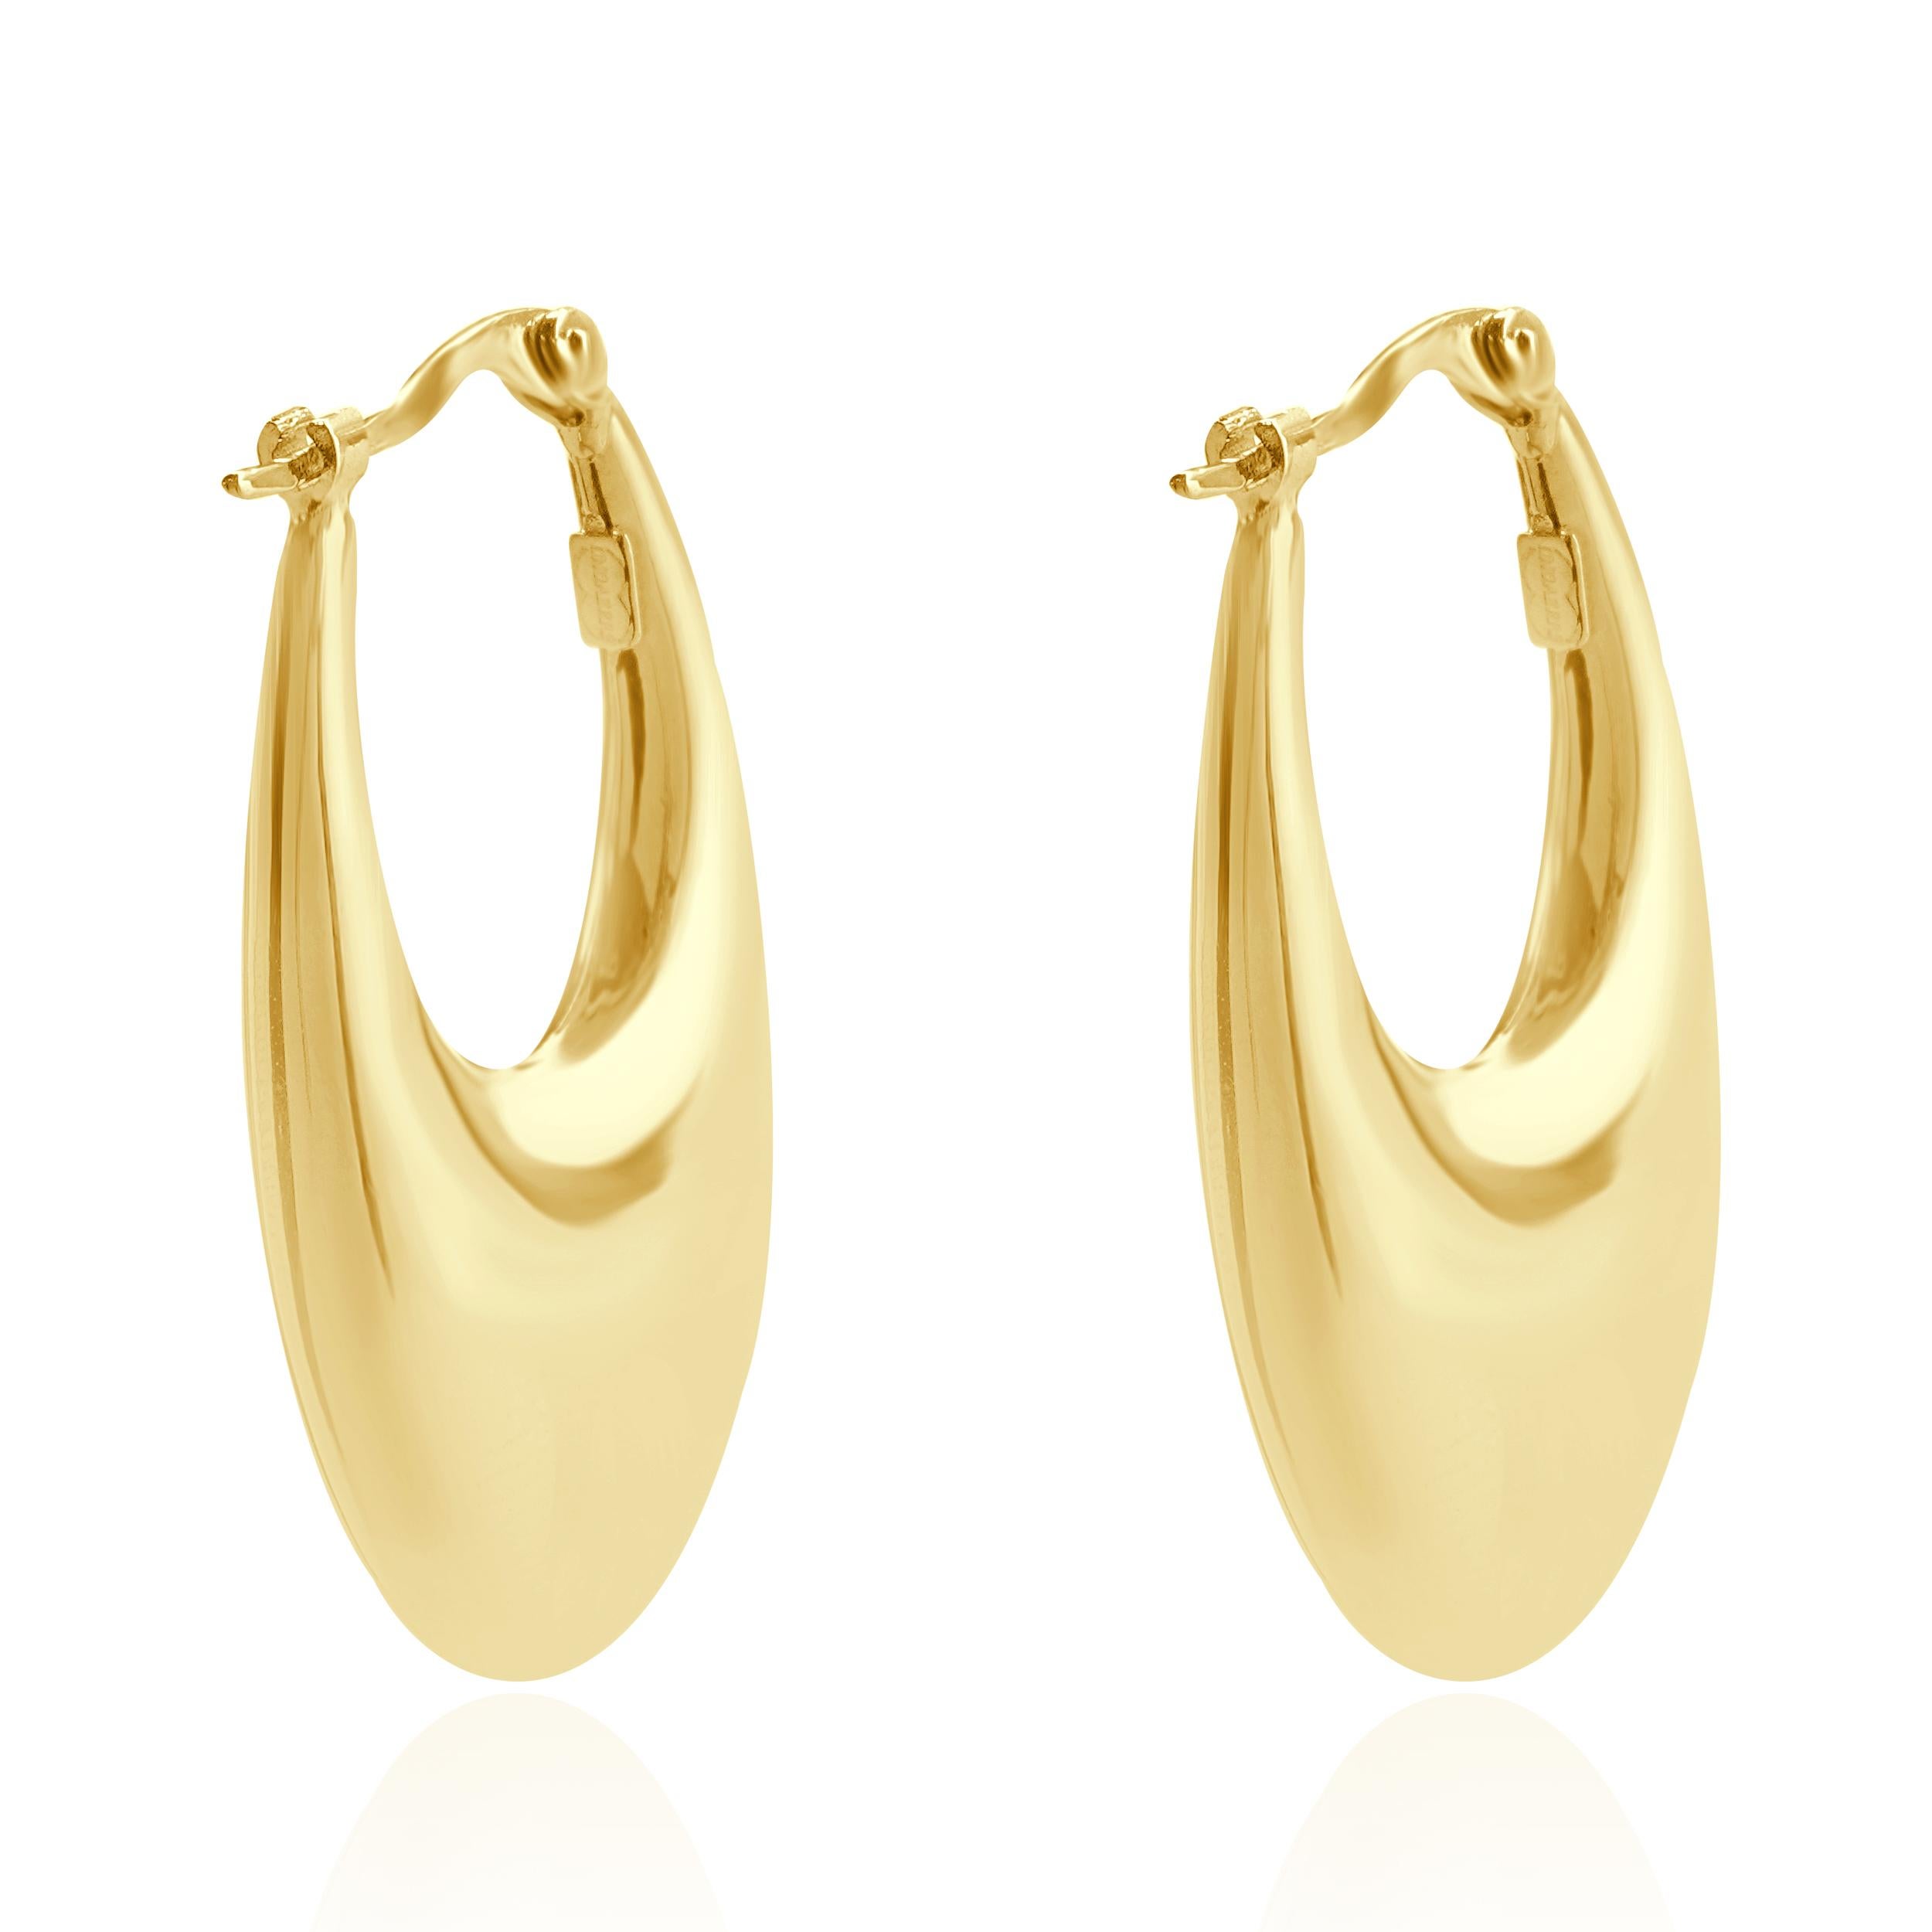 Uno Aerre 18 Karat Yellow Gold Puffed Hoop Earrings In Excellent Condition For Sale In Scottsdale, AZ